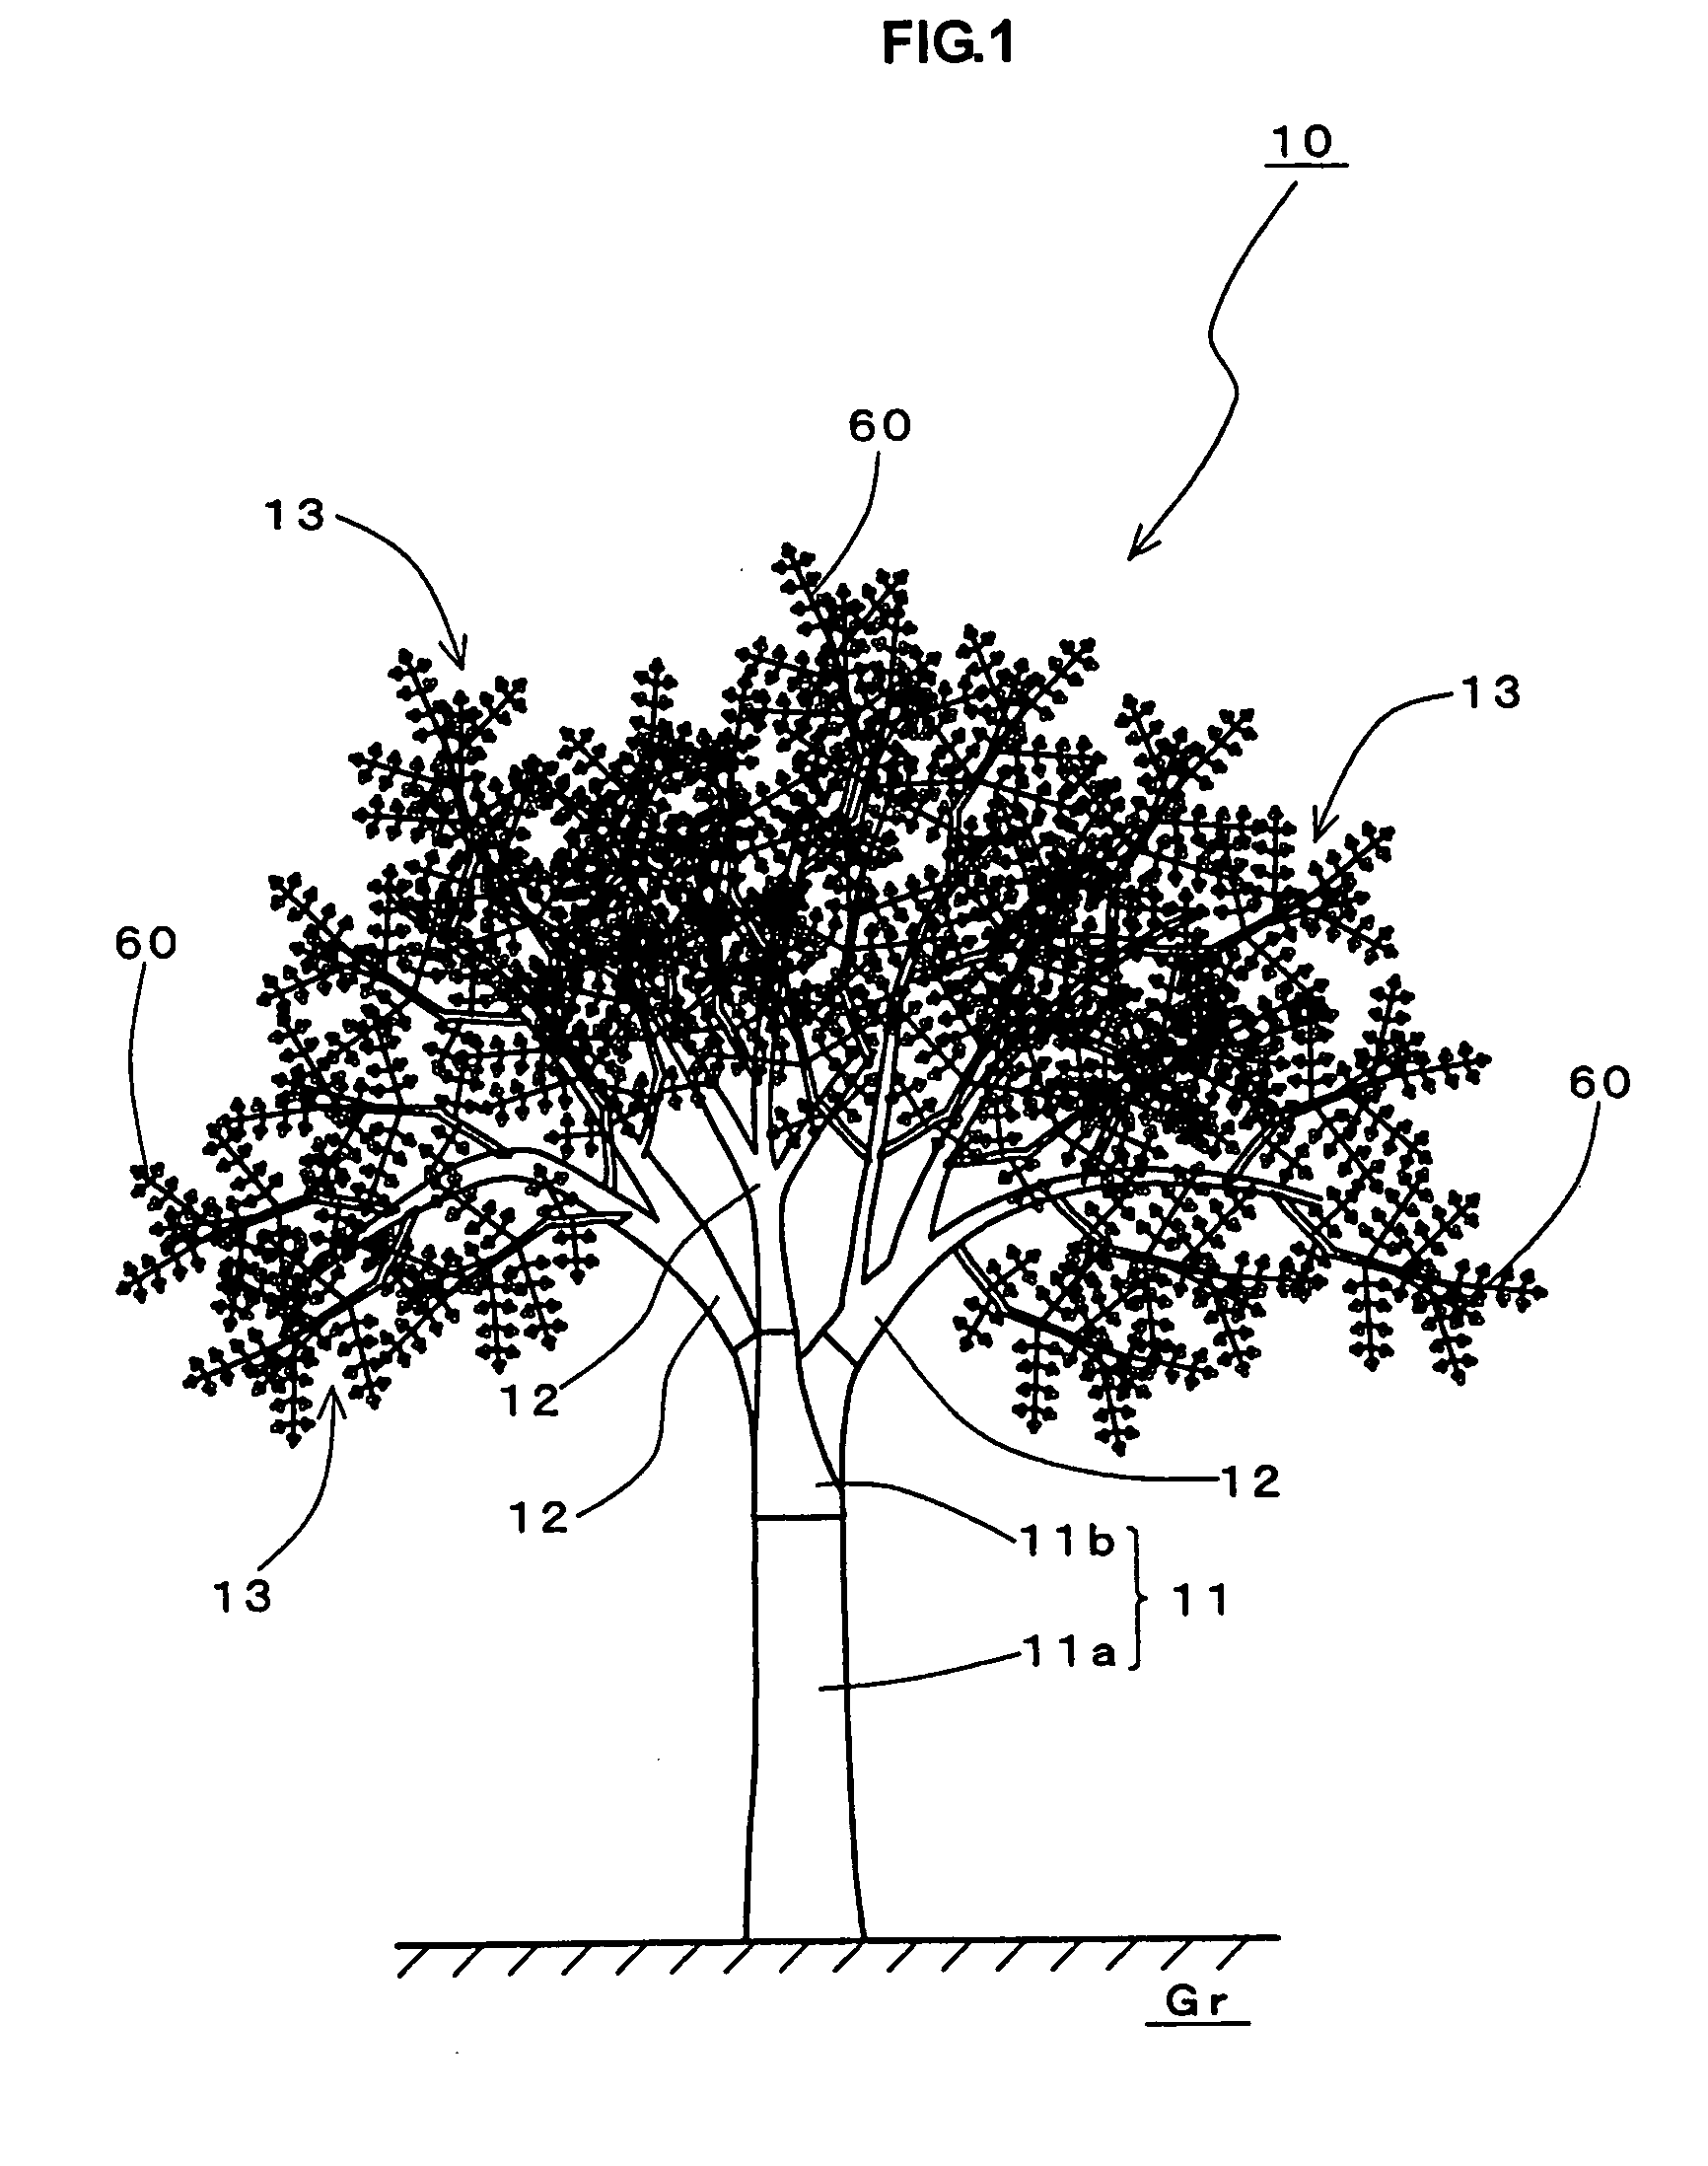 Electrical tree structure